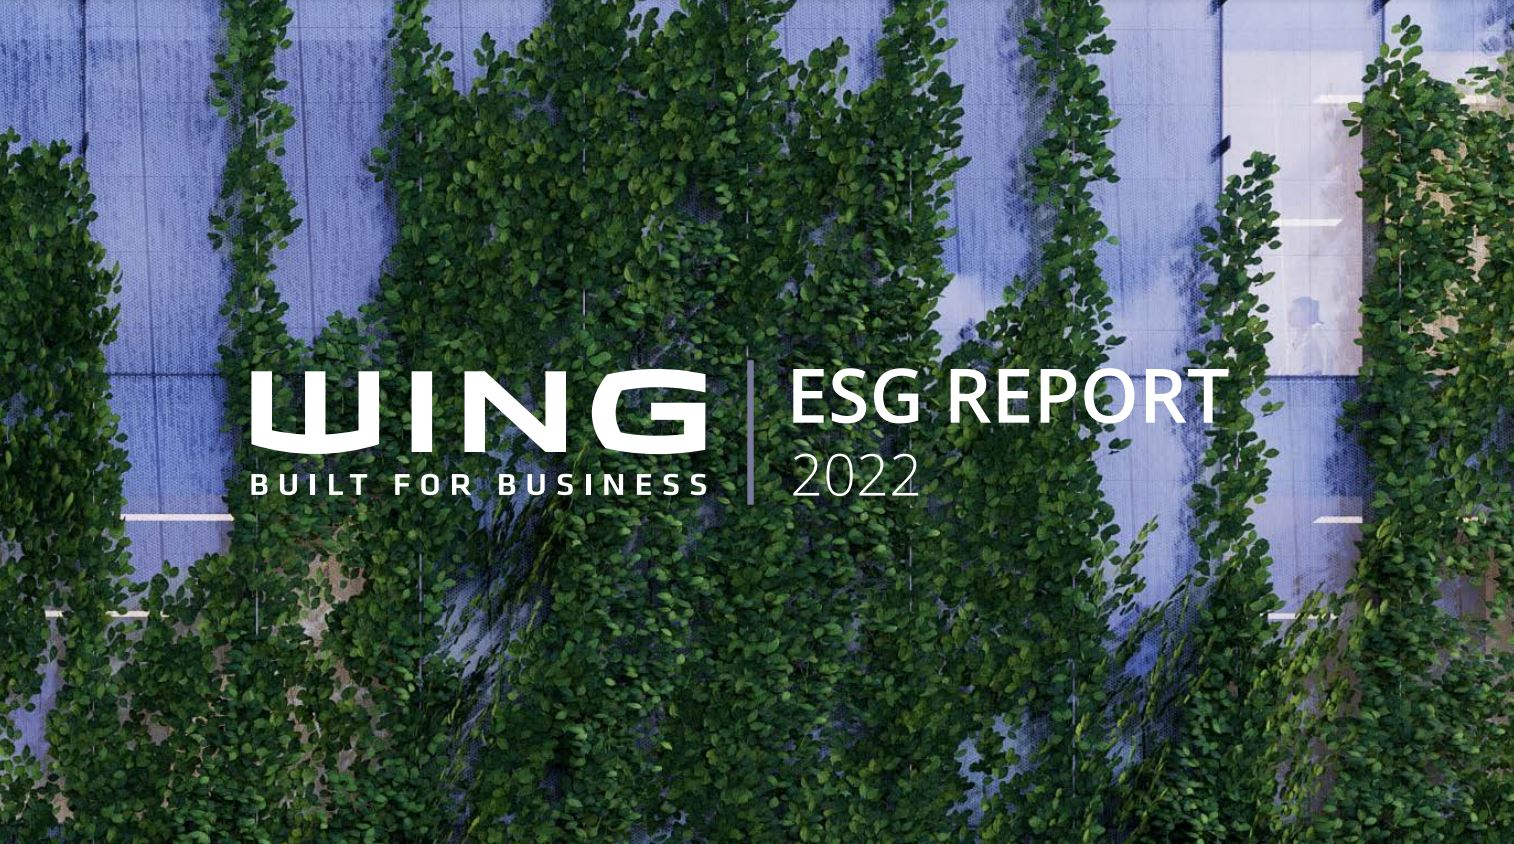 WING’s latest ESG report is available